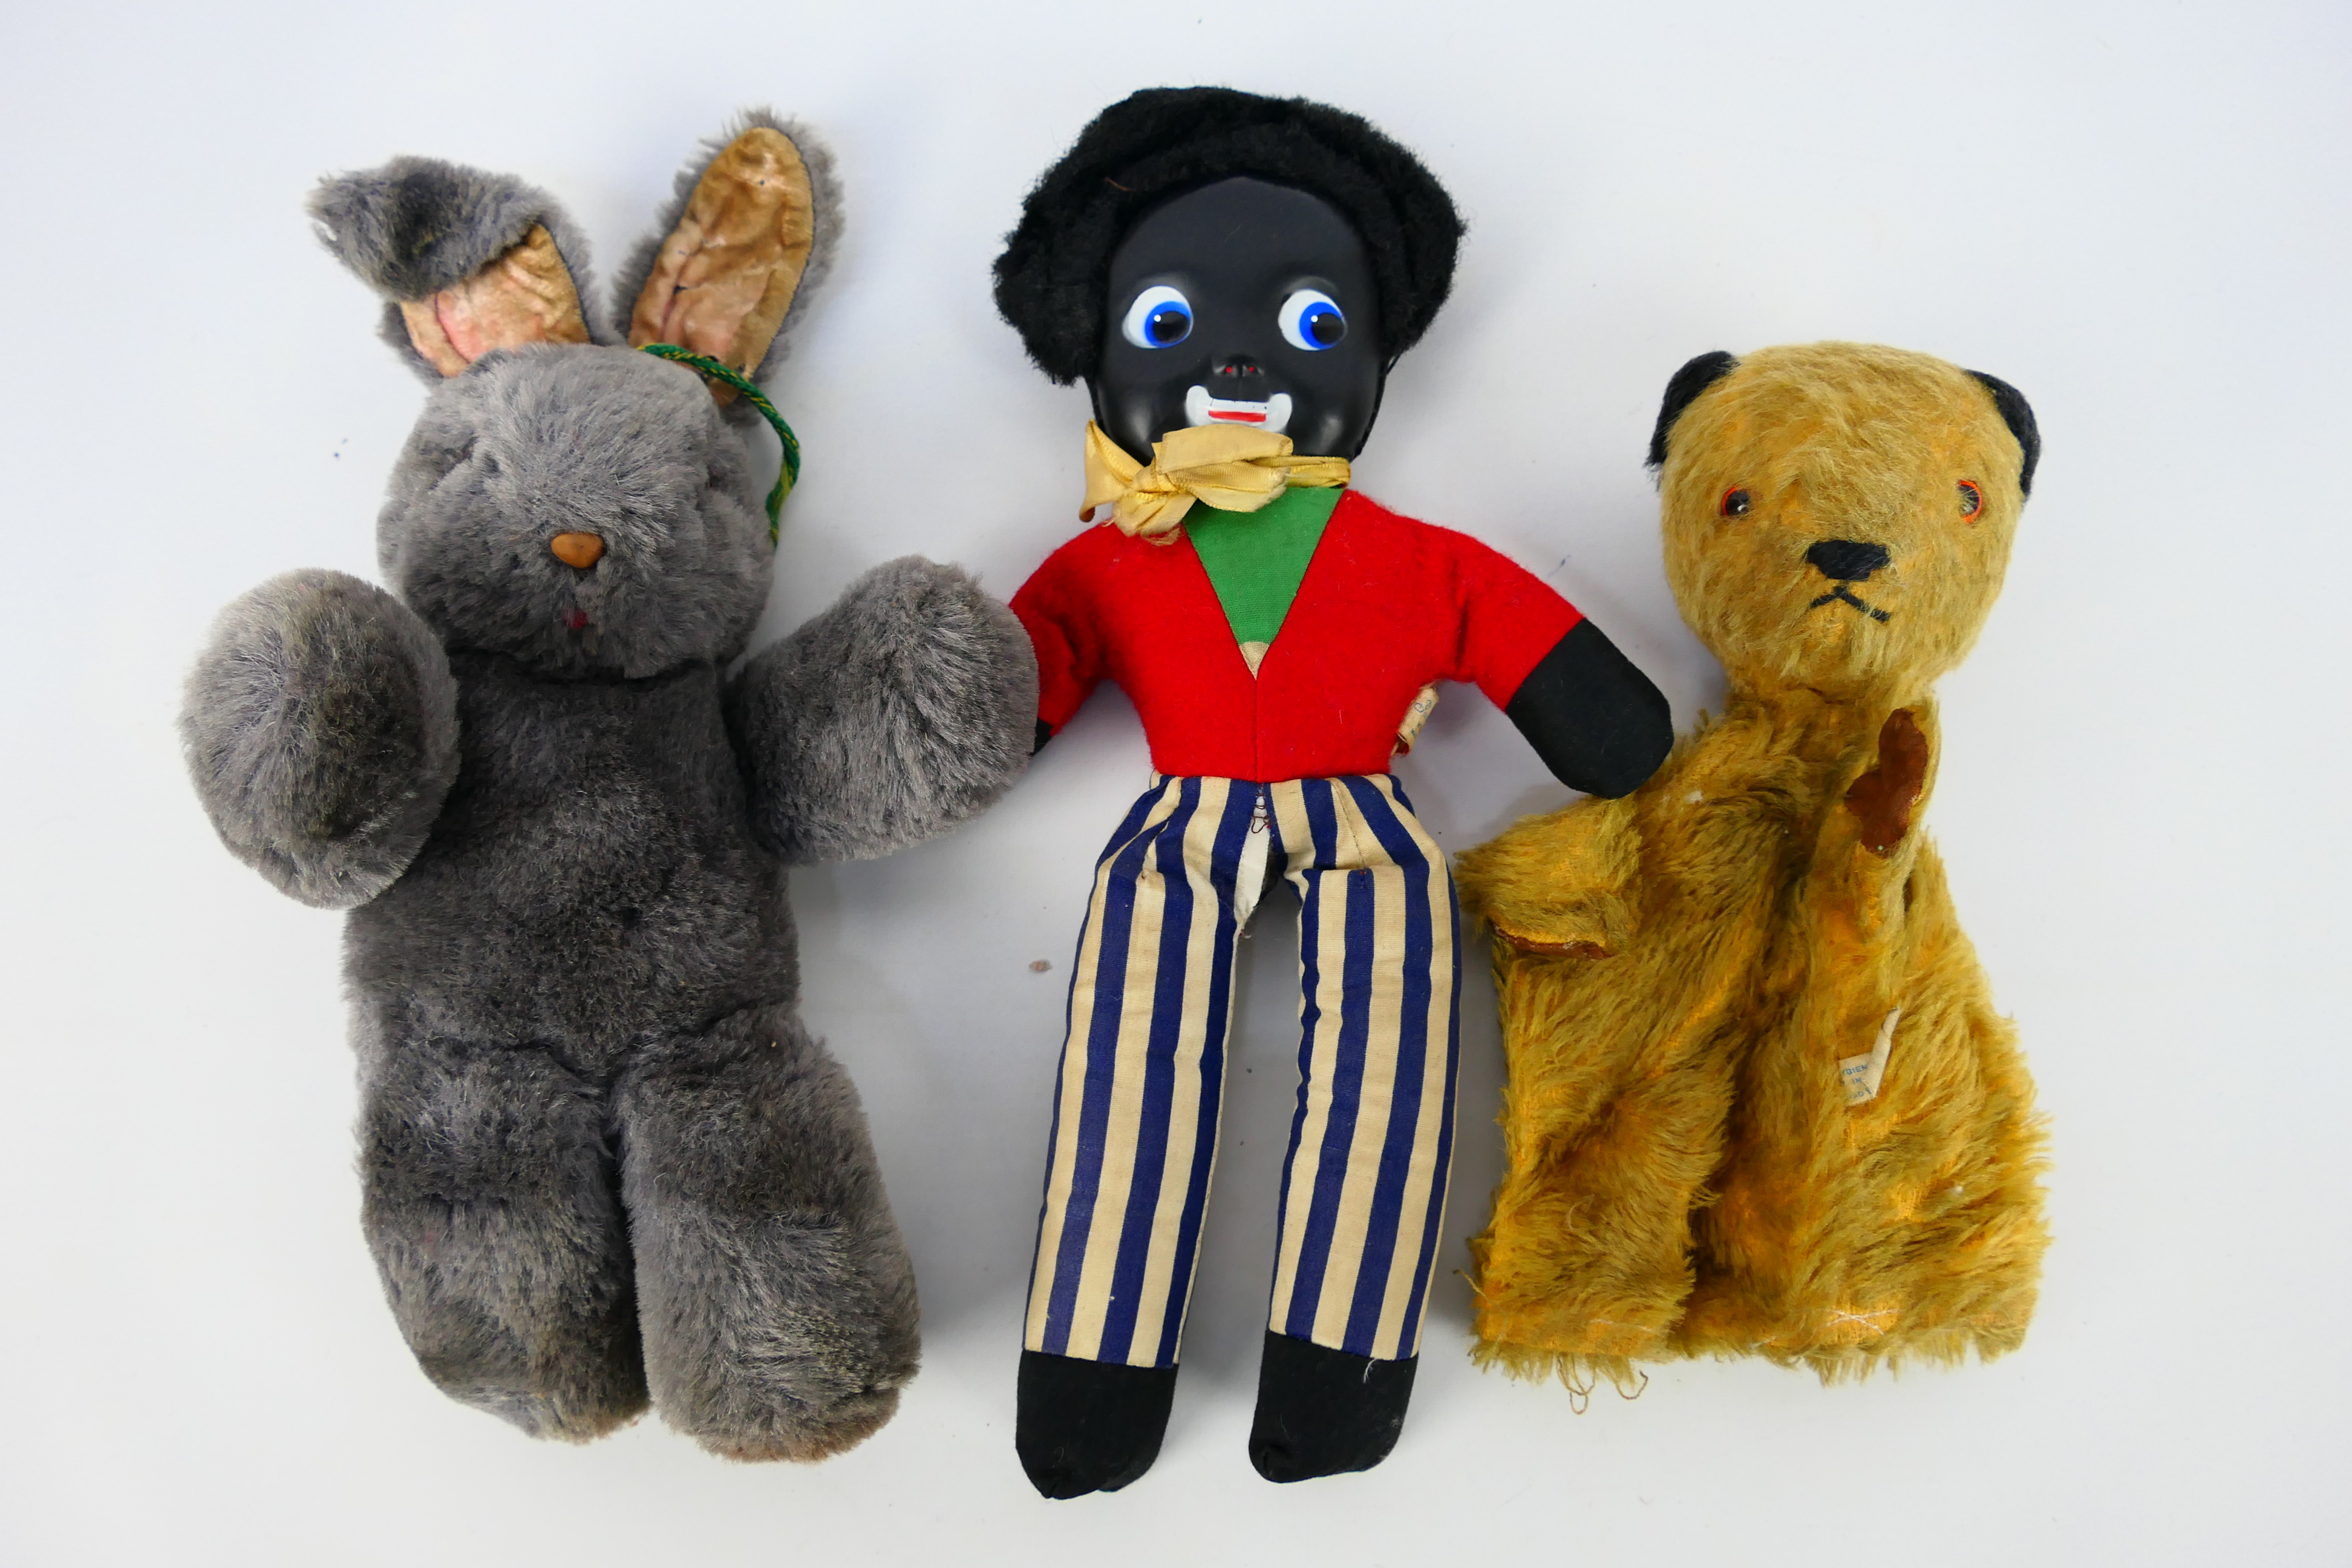 Pamela Foster - Chad Valley - Sooty - An unboxed Sooty Puppet, Golly and Bunny Plush.